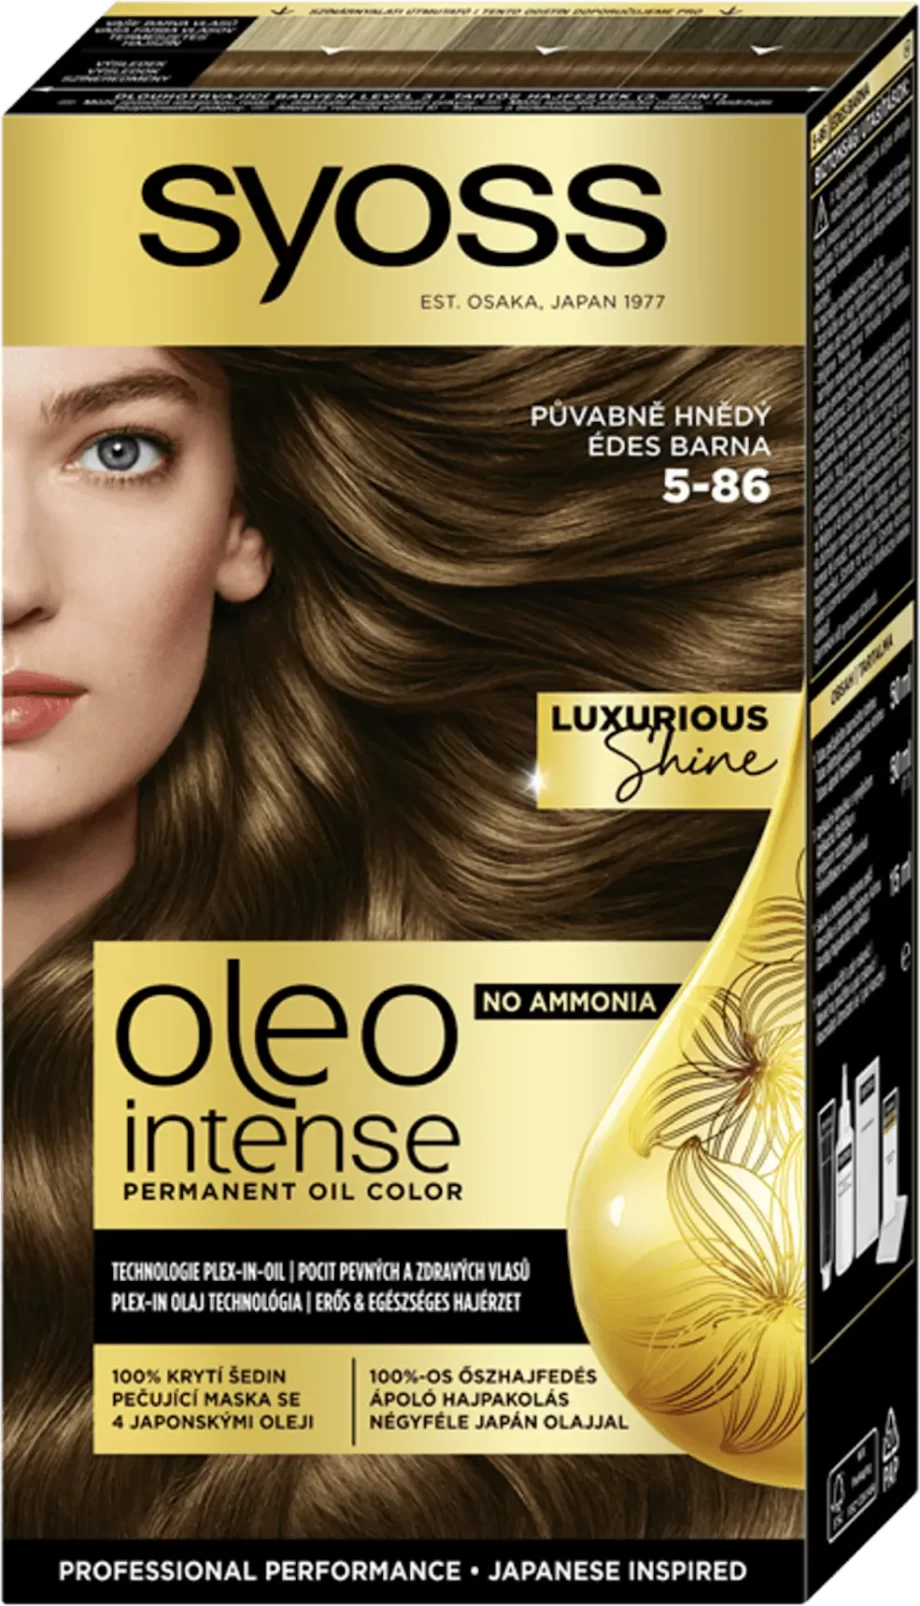 syoss oleo intense 5-86 sweet brown permanent oil color